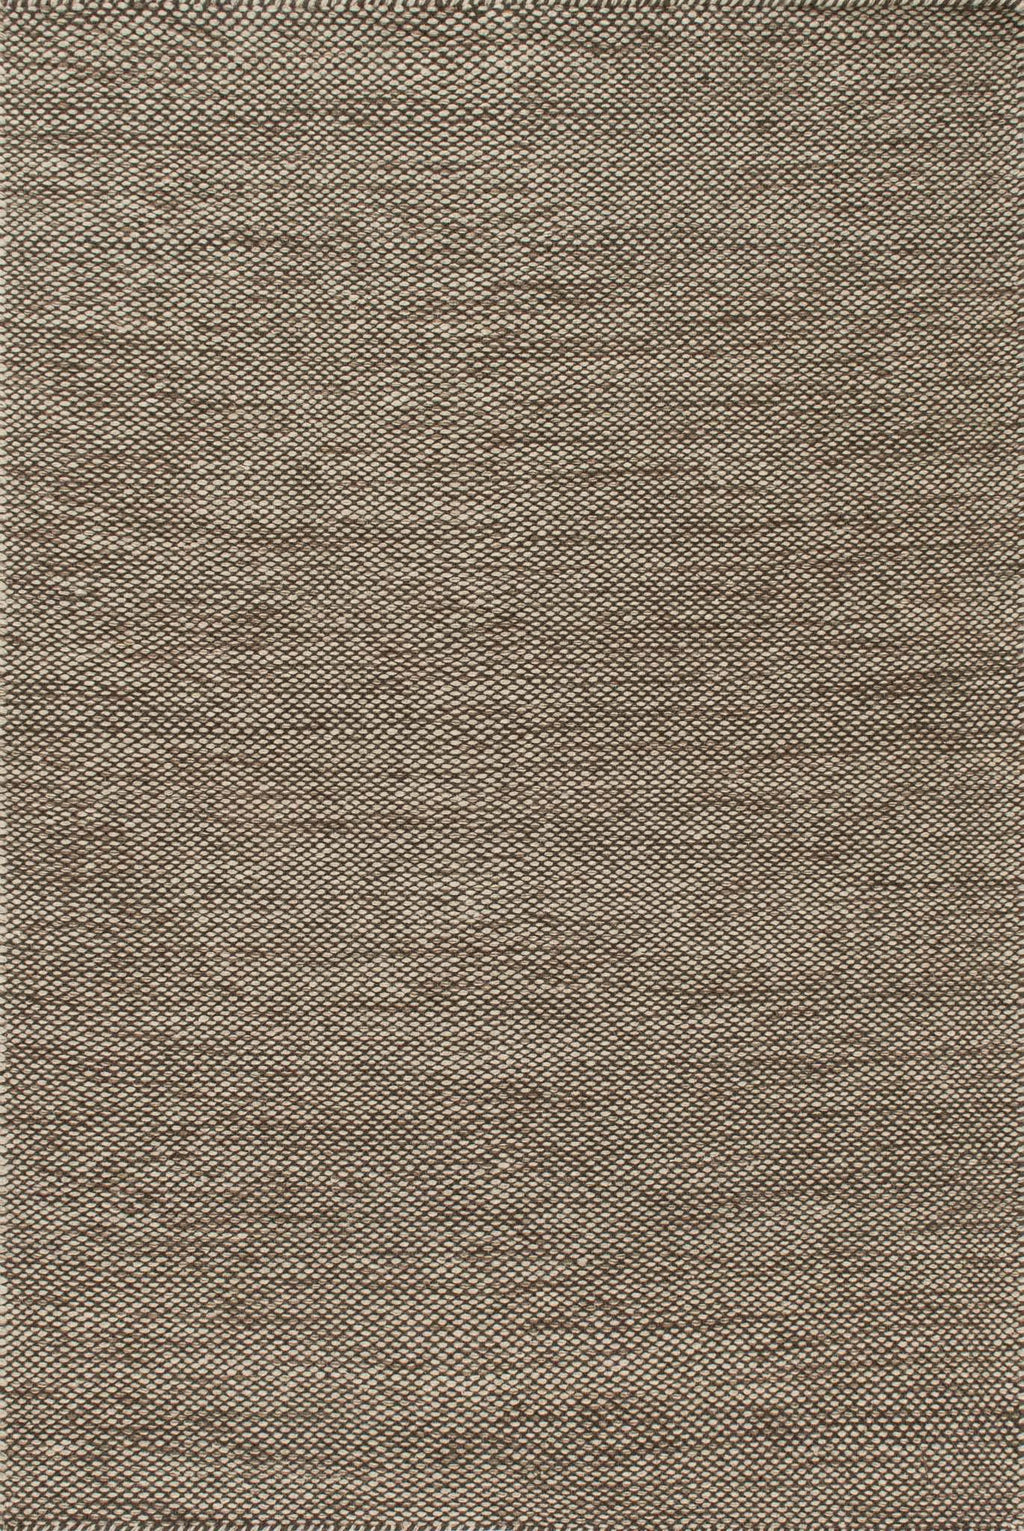 OAKWOOD Collection Wool Rug  in  STONE Gray Small Hand-Woven Wool